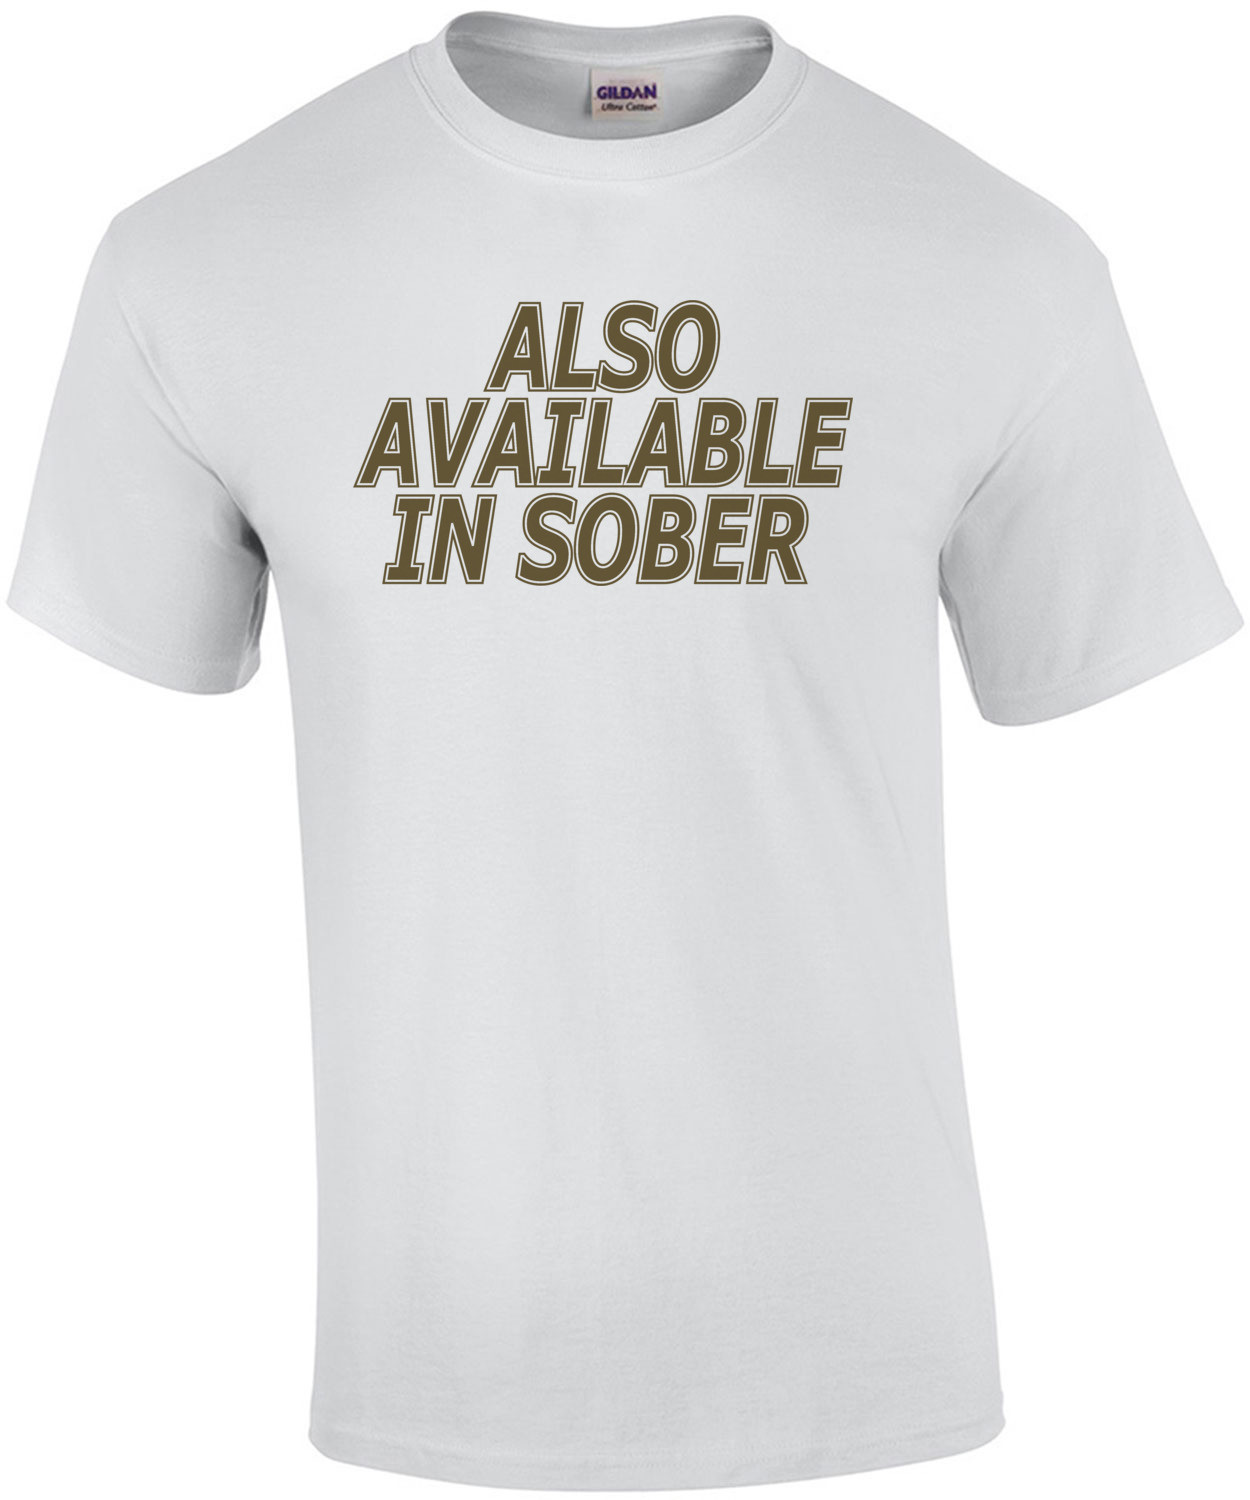 Also Available In Sober T-Shirt